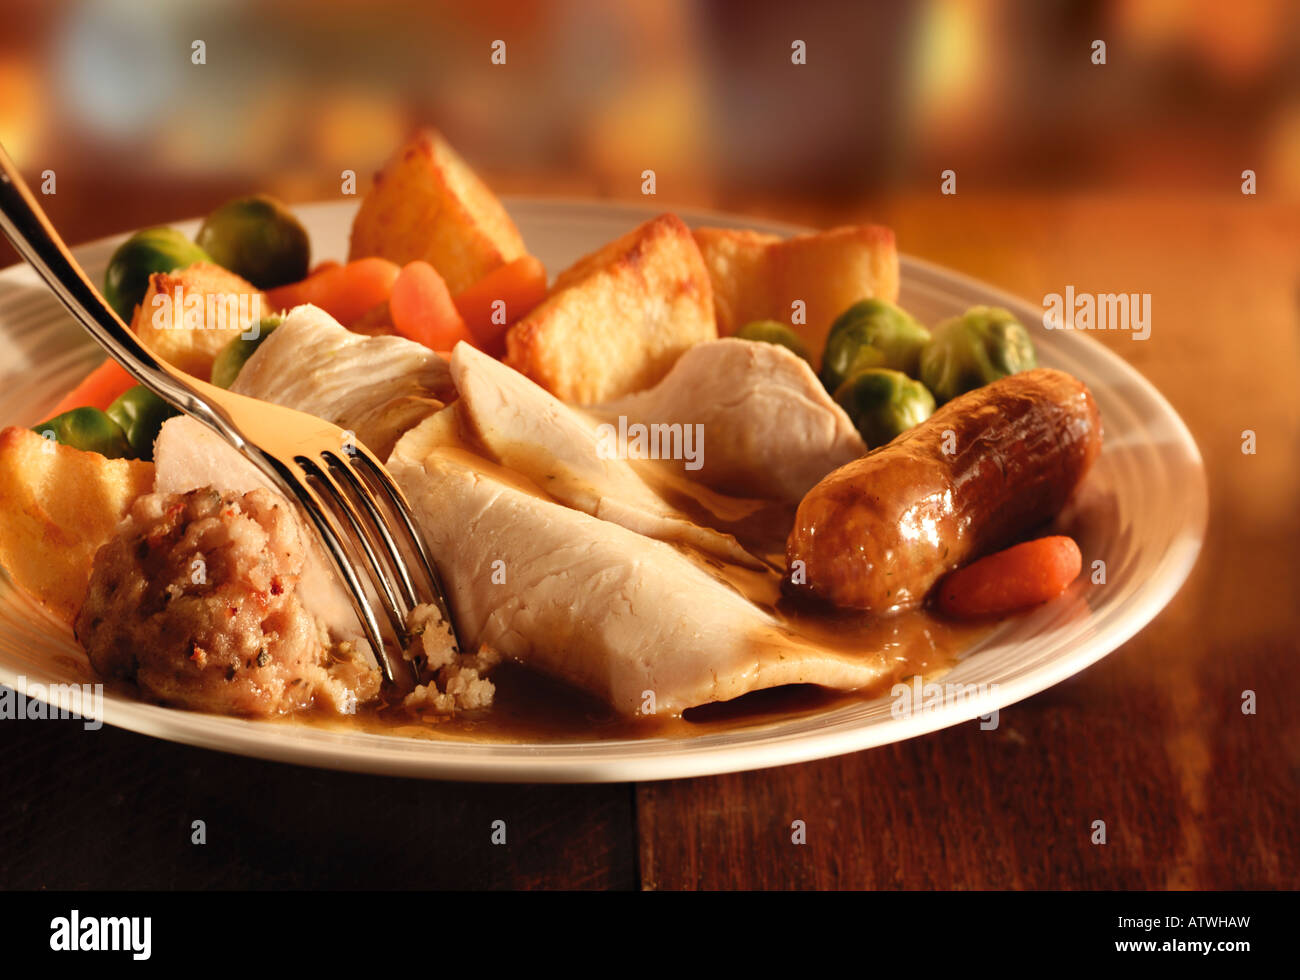 Traditional roast turkey dinner with roast potatoes and stuffing Stock Photo